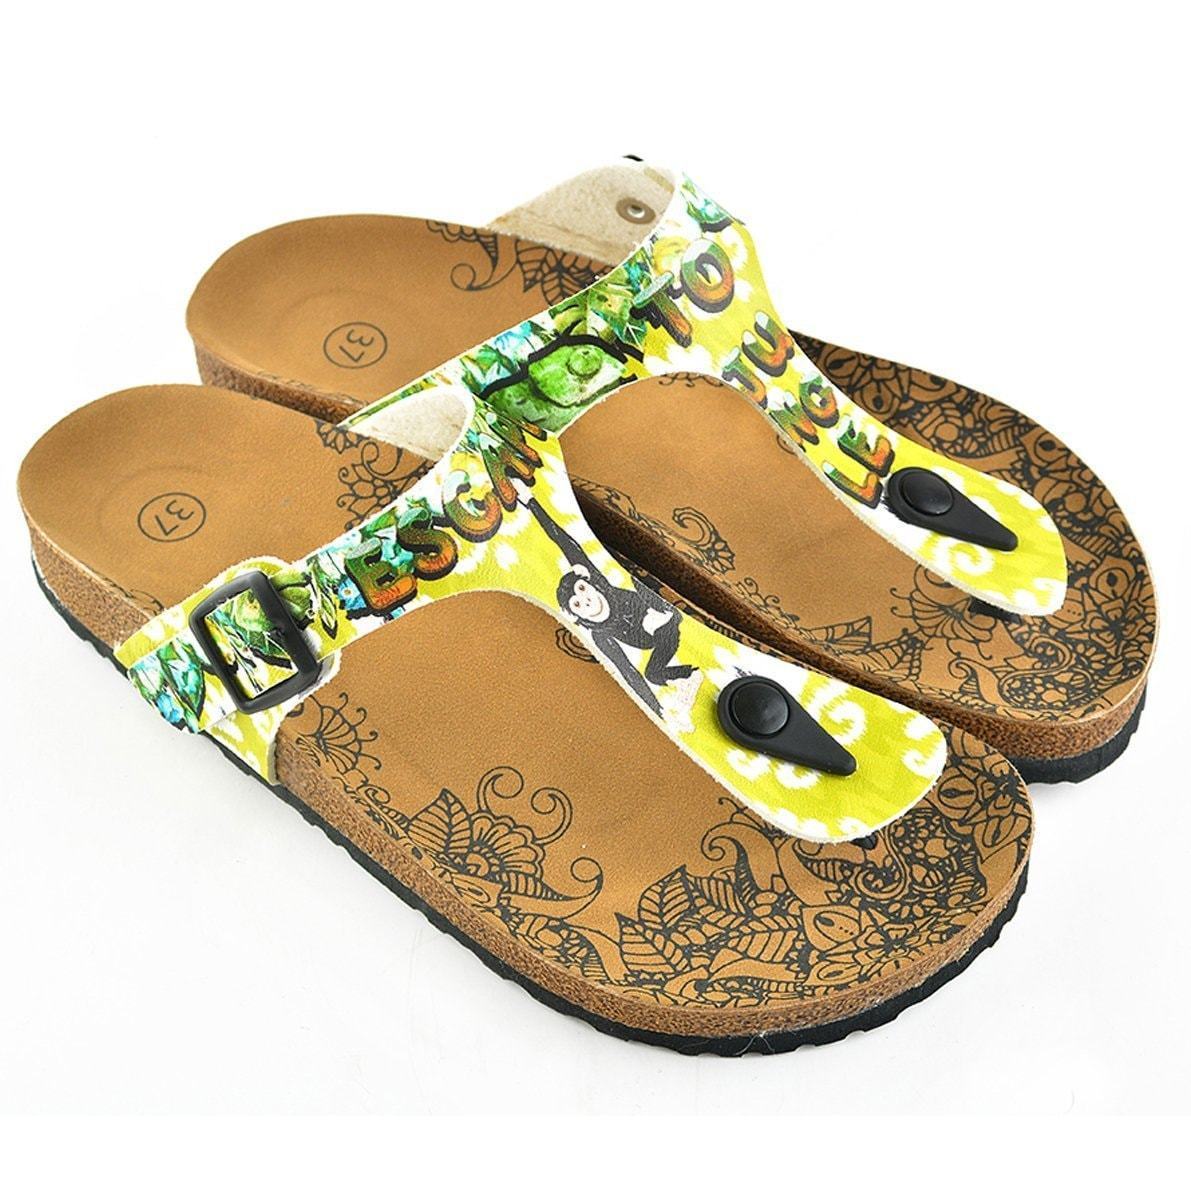 Escape to Jungle Sandal CAL508 - Goby CALCEO Sandal 